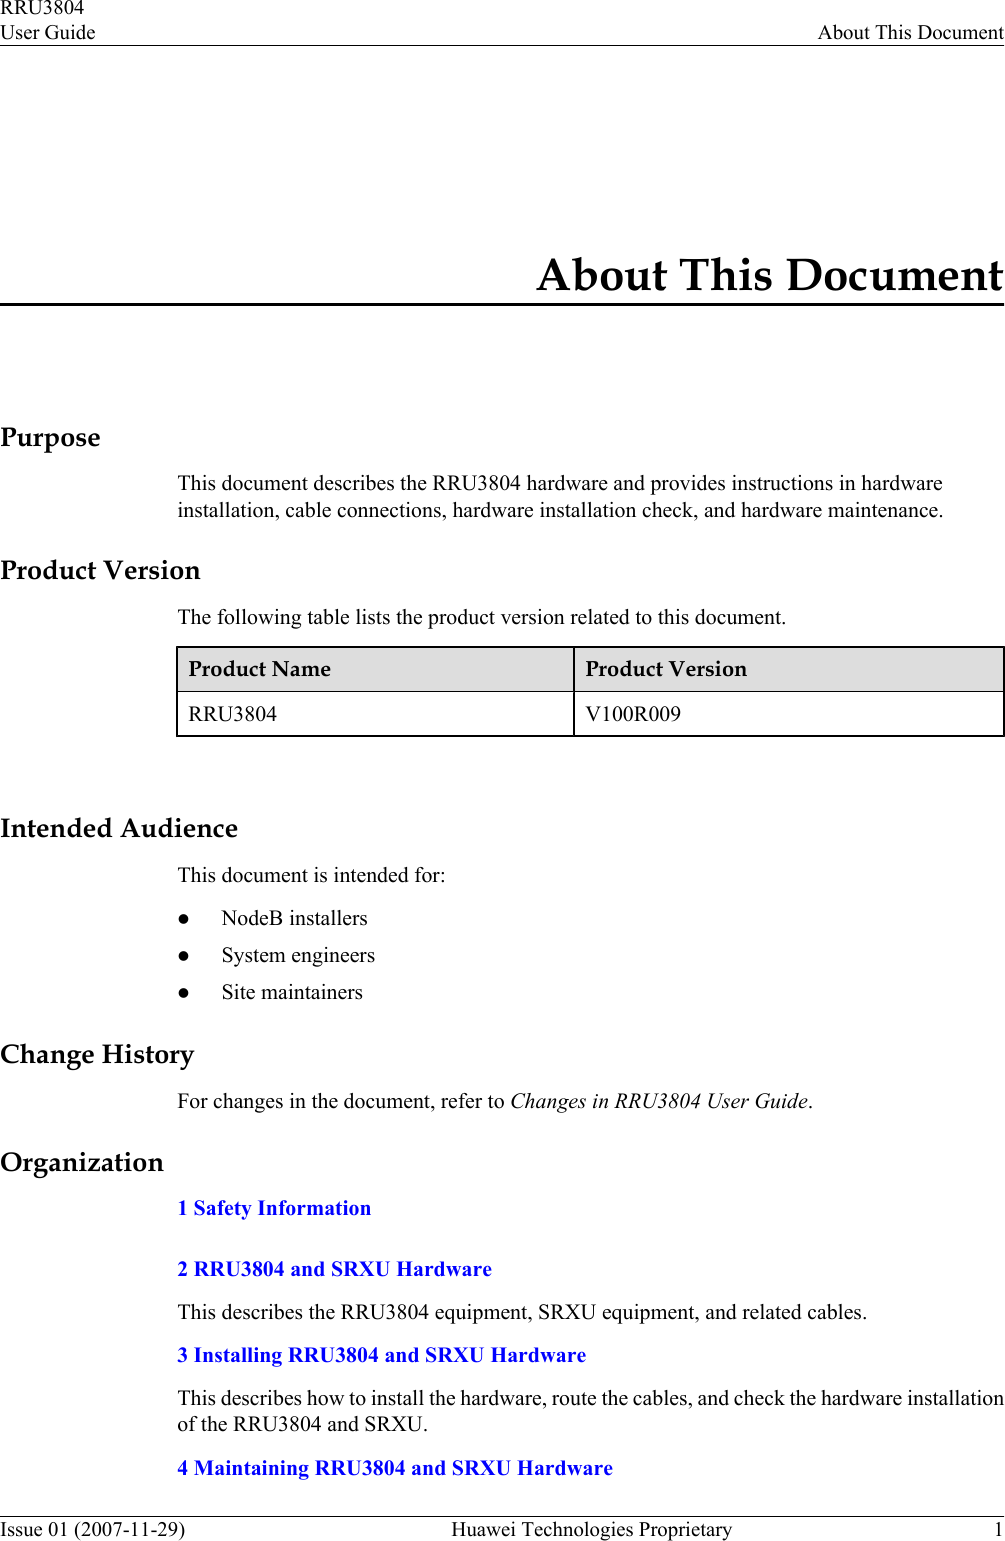 About This DocumentPurposeThis document describes the RRU3804 hardware and provides instructions in hardwareinstallation, cable connections, hardware installation check, and hardware maintenance.Product VersionThe following table lists the product version related to this document.Product Name Product VersionRRU3804 V100R009 Intended AudienceThis document is intended for:lNodeB installerslSystem engineerslSite maintainersChange HistoryFor changes in the document, refer to Changes in RRU3804 User Guide.Organization1 Safety Information2 RRU3804 and SRXU HardwareThis describes the RRU3804 equipment, SRXU equipment, and related cables.3 Installing RRU3804 and SRXU HardwareThis describes how to install the hardware, route the cables, and check the hardware installationof the RRU3804 and SRXU.4 Maintaining RRU3804 and SRXU HardwareRRU3804User Guide About This DocumentIssue 01 (2007-11-29)  Huawei Technologies Proprietary 1